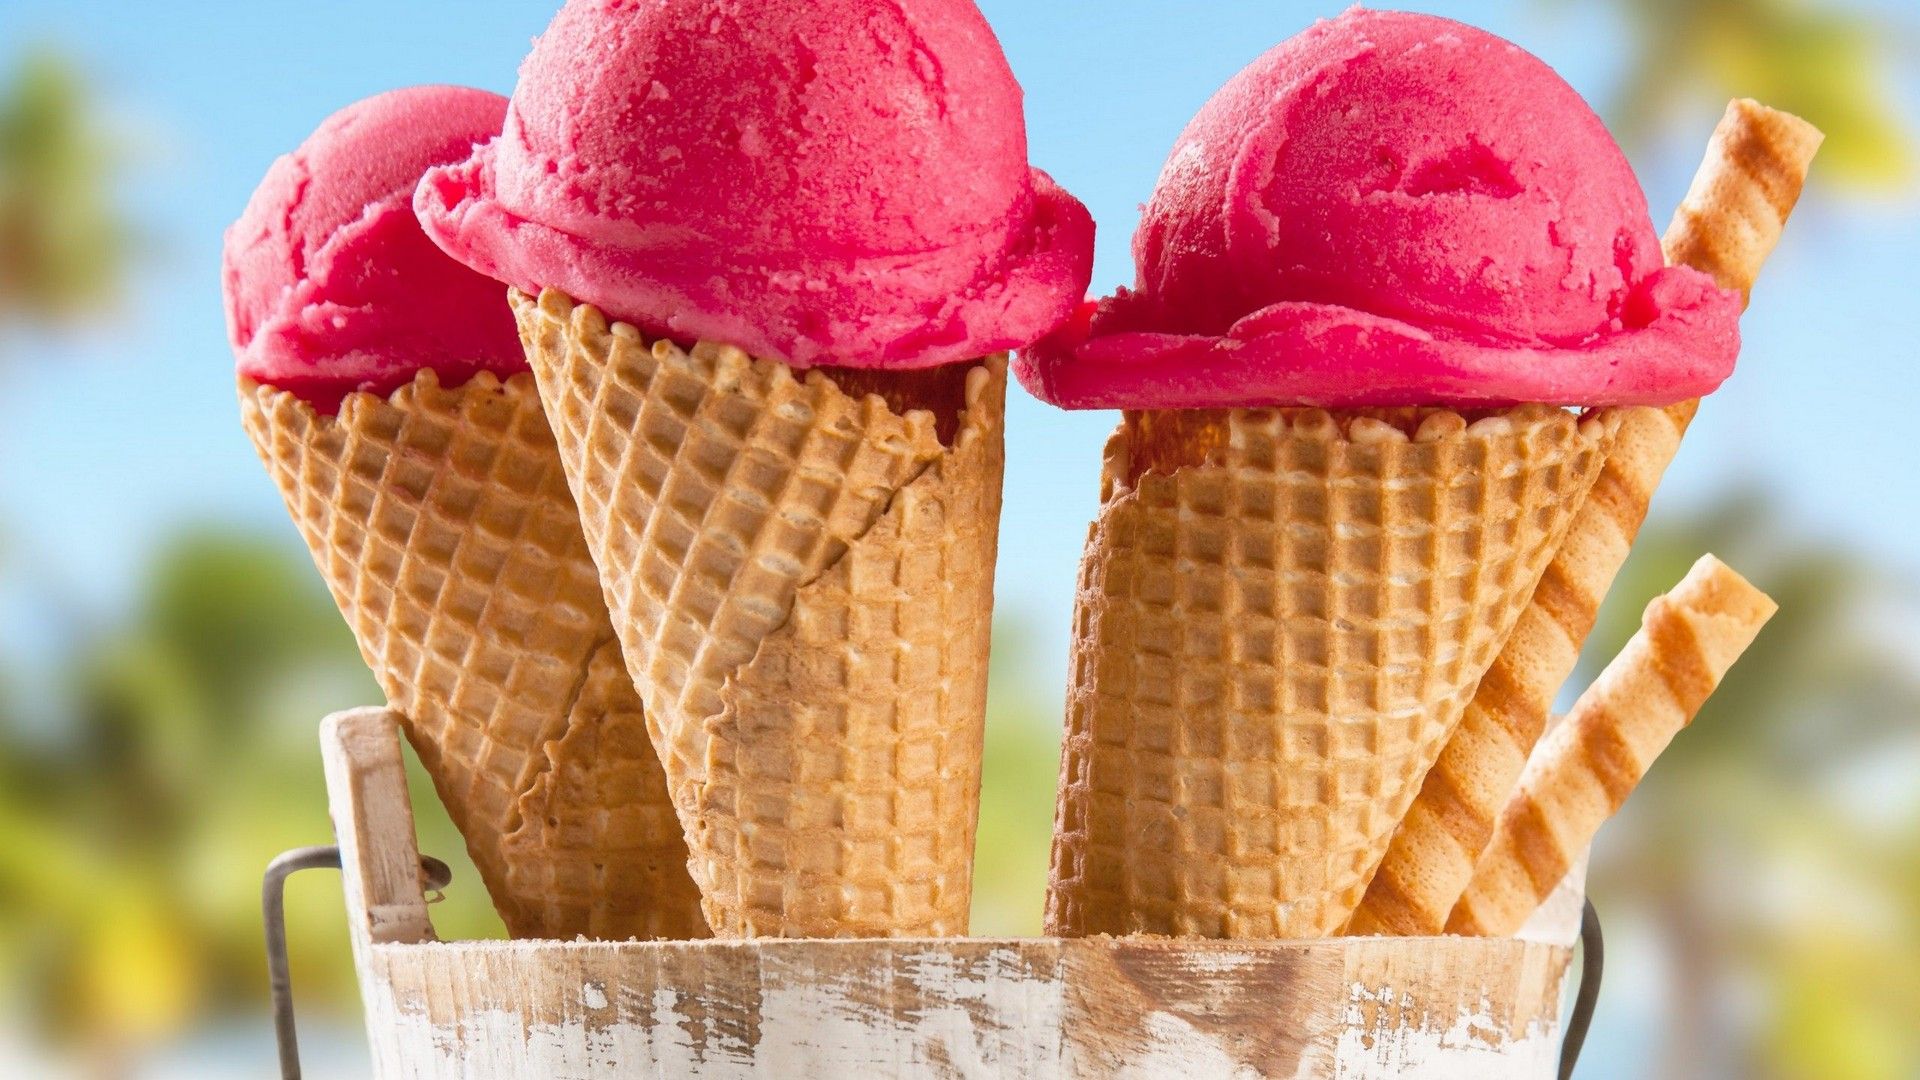 Recurring Ice Cream Wallpaper. Tile Background Stock Photo, Picture and  Royalty Free Image. Image 196760846.